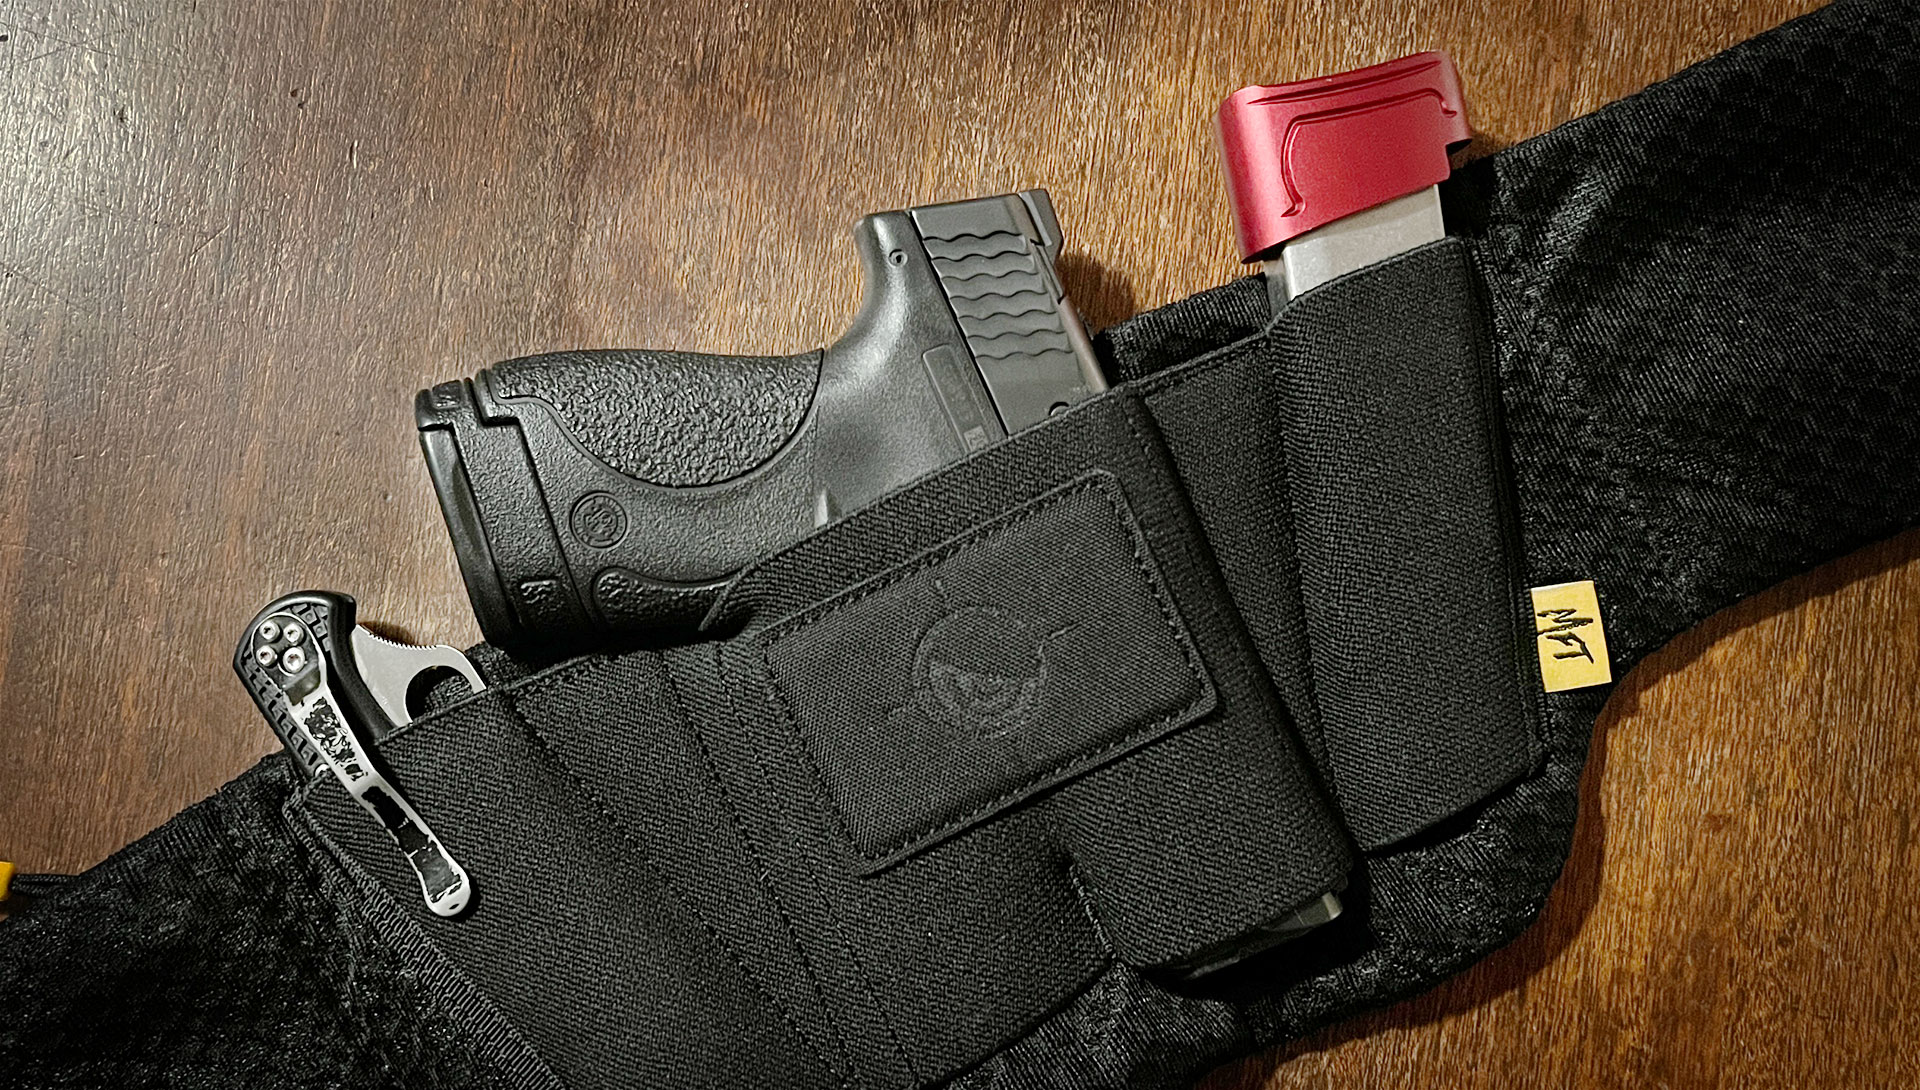 The VNSH Holster